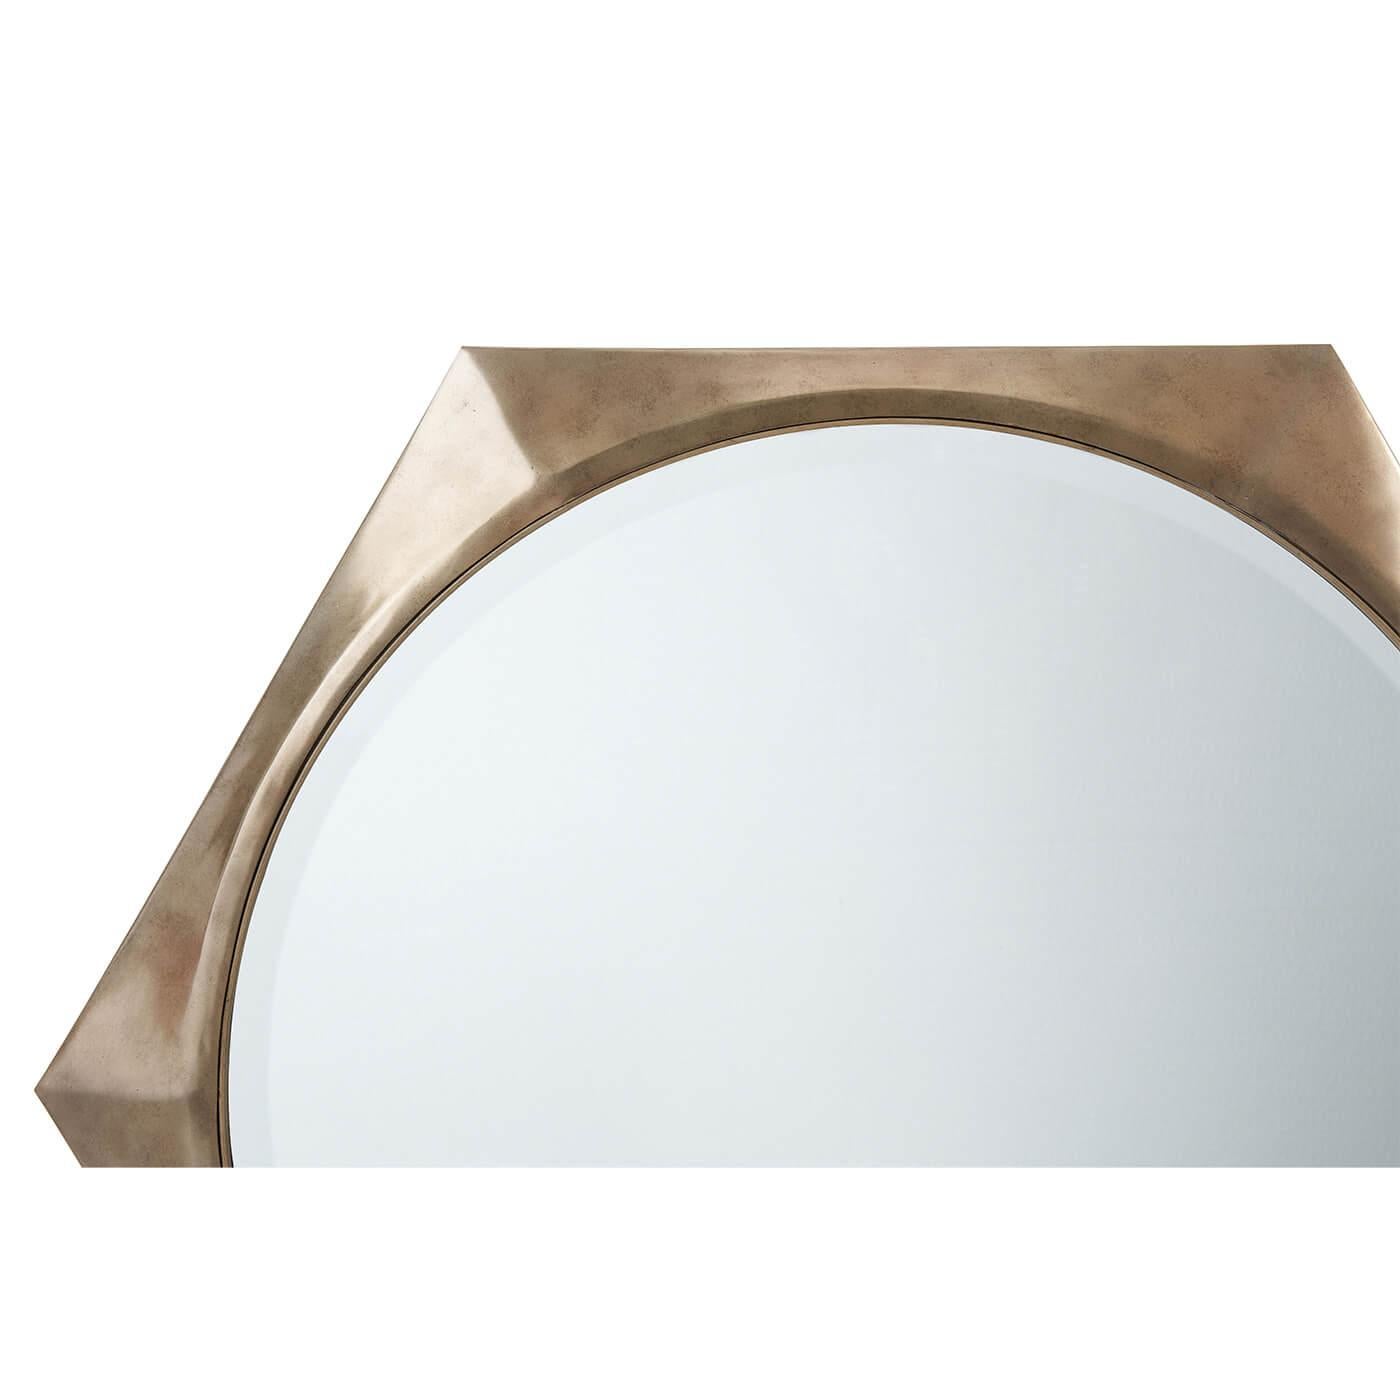 A modern hexagonal mirror is a modern solitaire frame inspired by a watch face. A round bevel-edge mirror plate is cast in a faceted octagonal frame. An understated yet striking decorative wall mirror in a vintage Brass finish.

Dimensions: 36